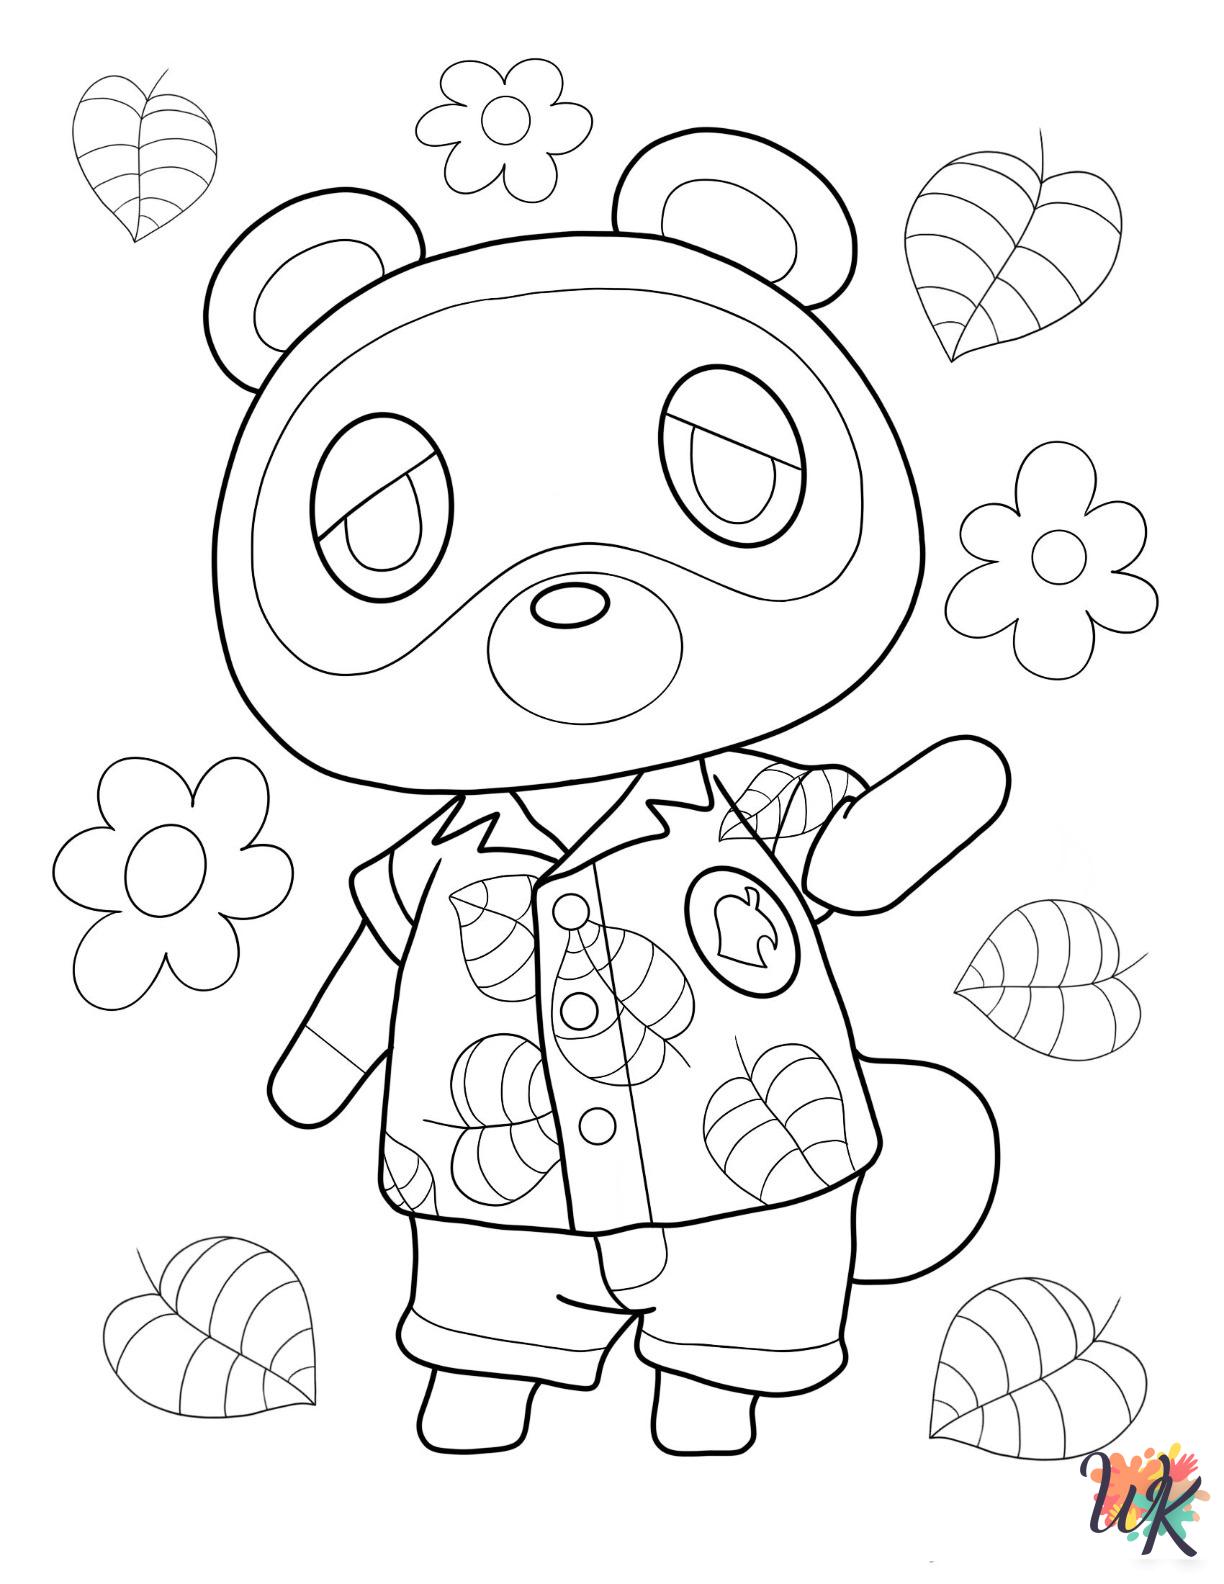 Animal Crossing coloring book pages